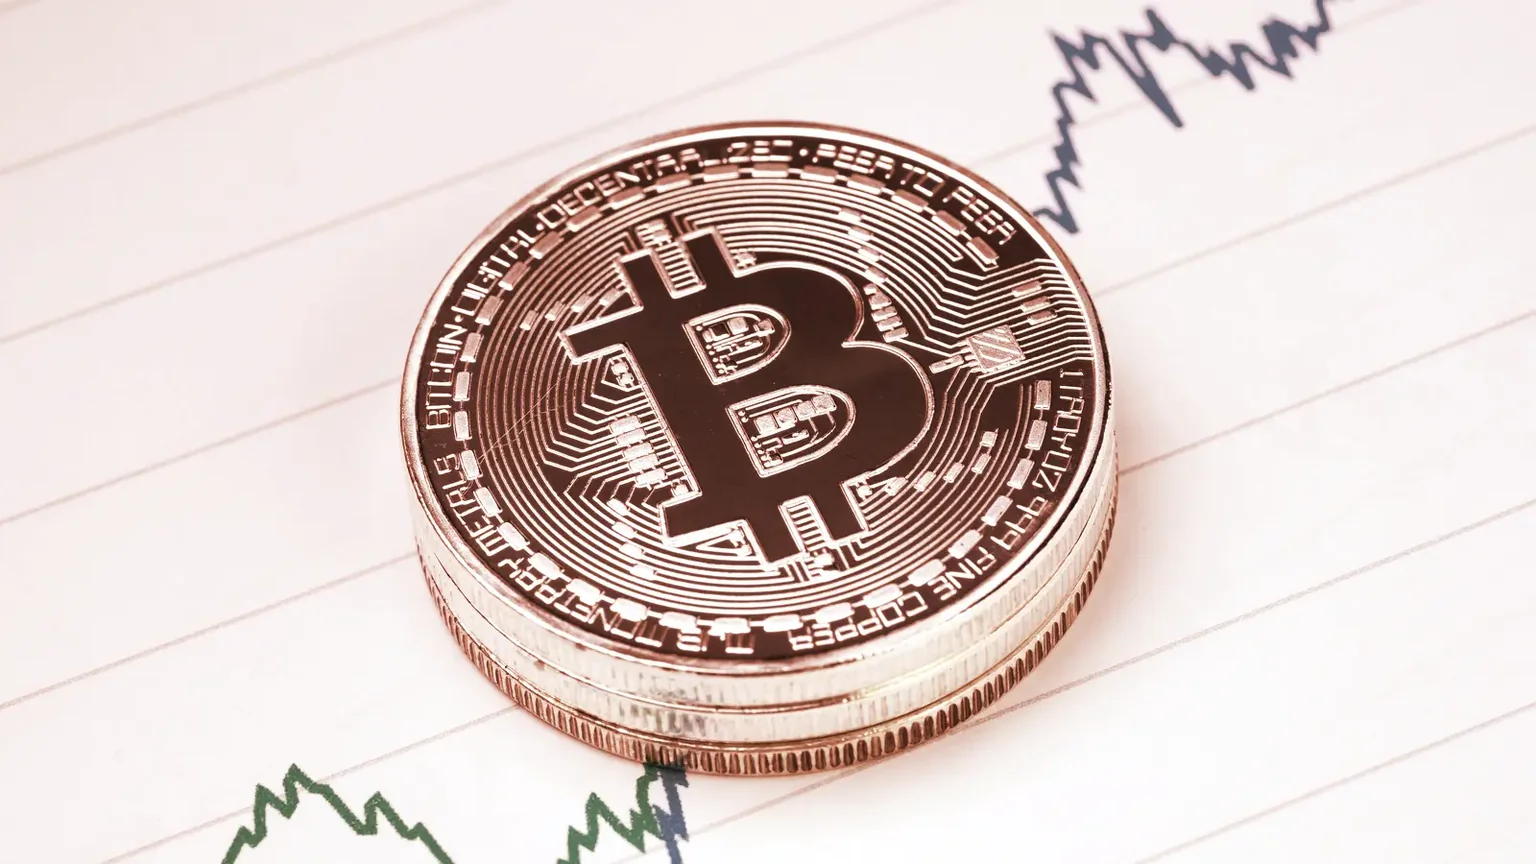 Bitcoin is the largest crypto asset by market cap. Image: Shutterstock.